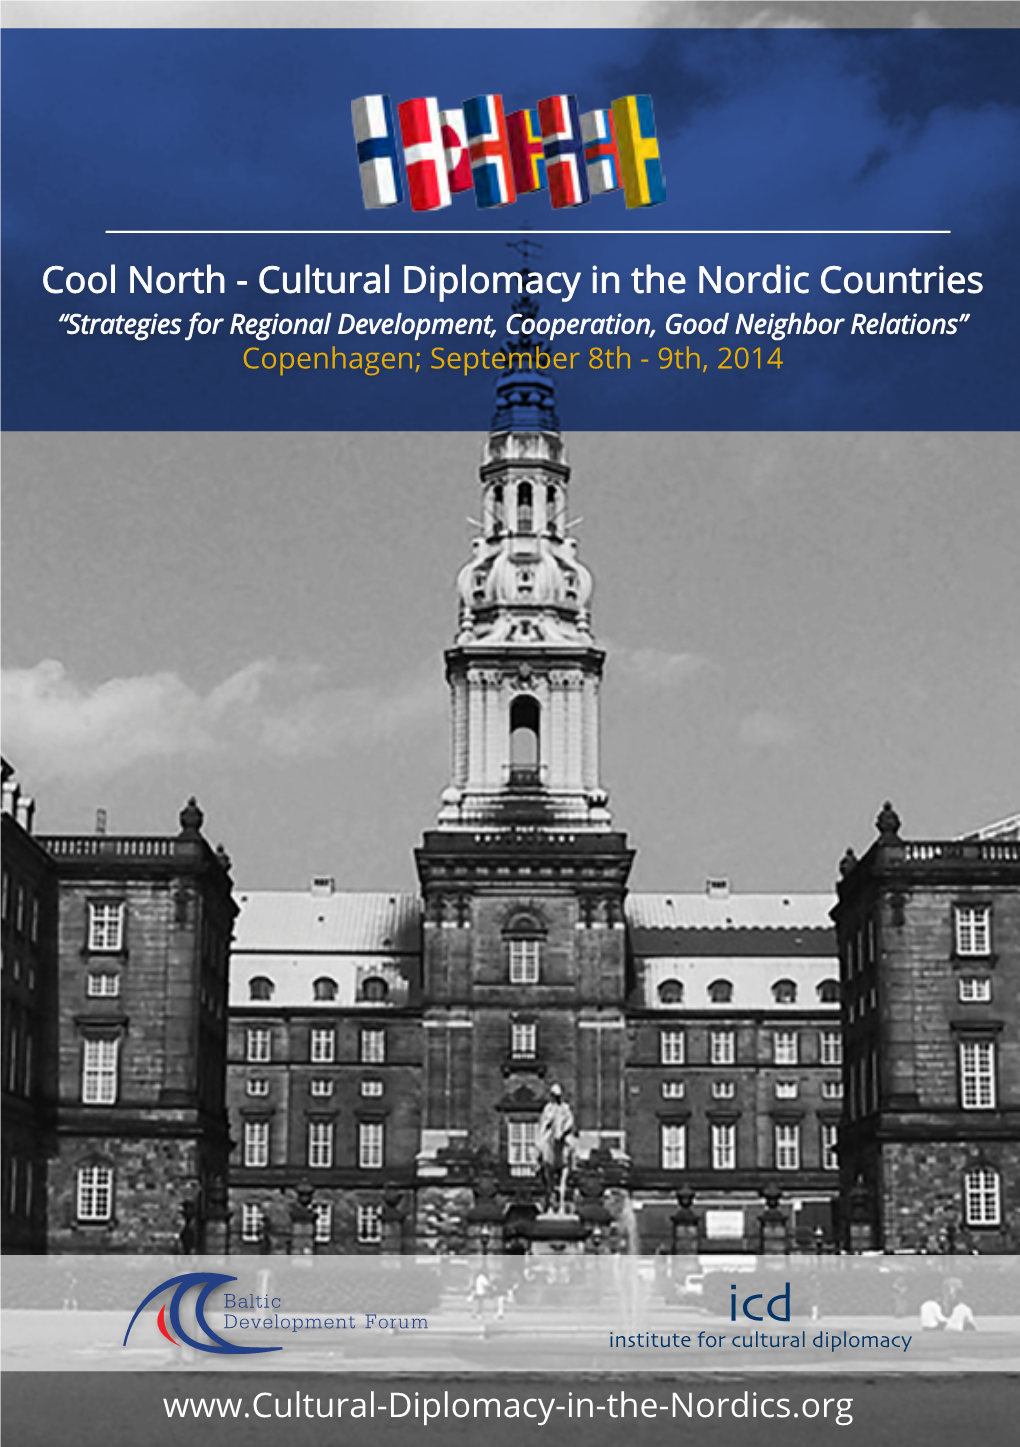 Cultural Diplomacy in the Nordic Countries “Strategies for Regional Development, Cooperation, Good Neighbor Relations” Copenhagen; September 8Th - 9Th, 2014